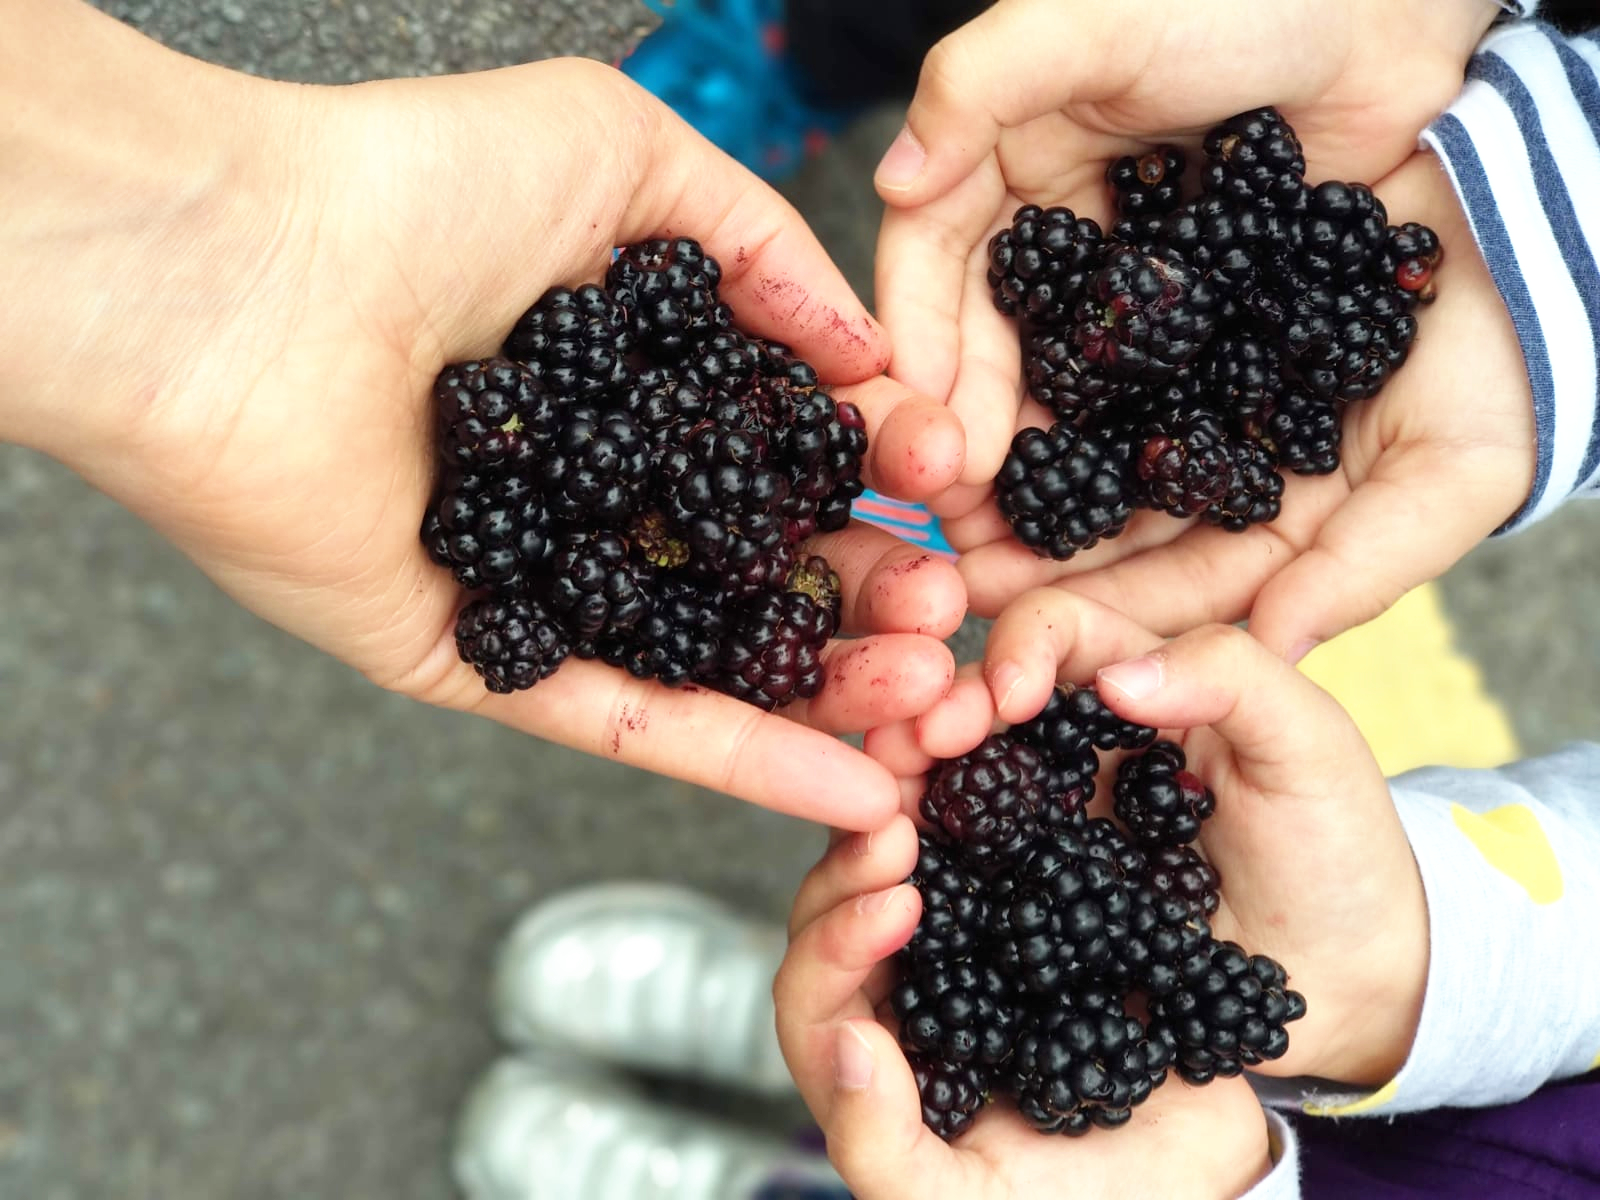 Children's hands are filled with blackberries